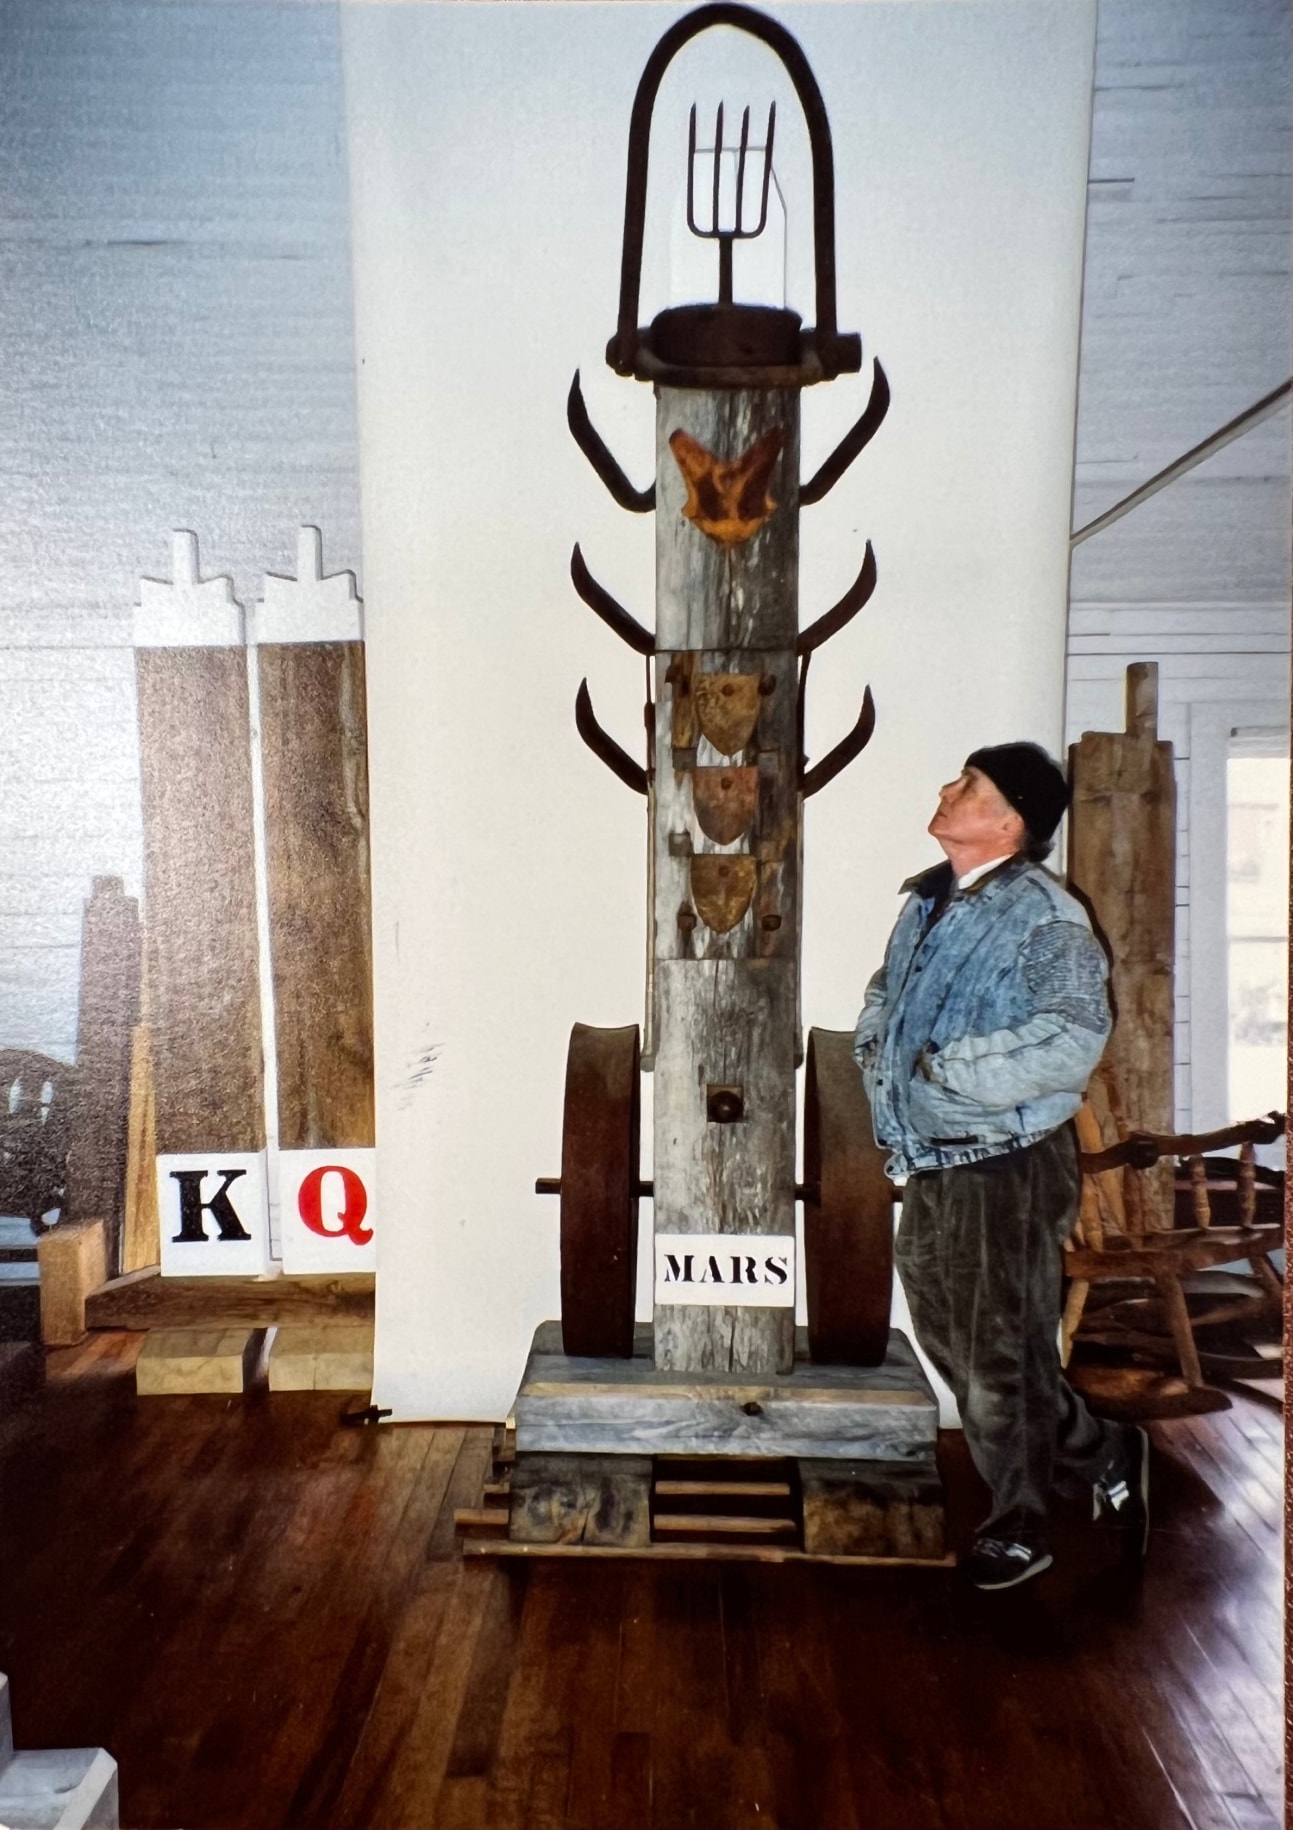 Indiana with Mars (1990) in his Vinalhaven studio&nbsp;; Monarchy (1981) is visible in the back left, &nbsp;